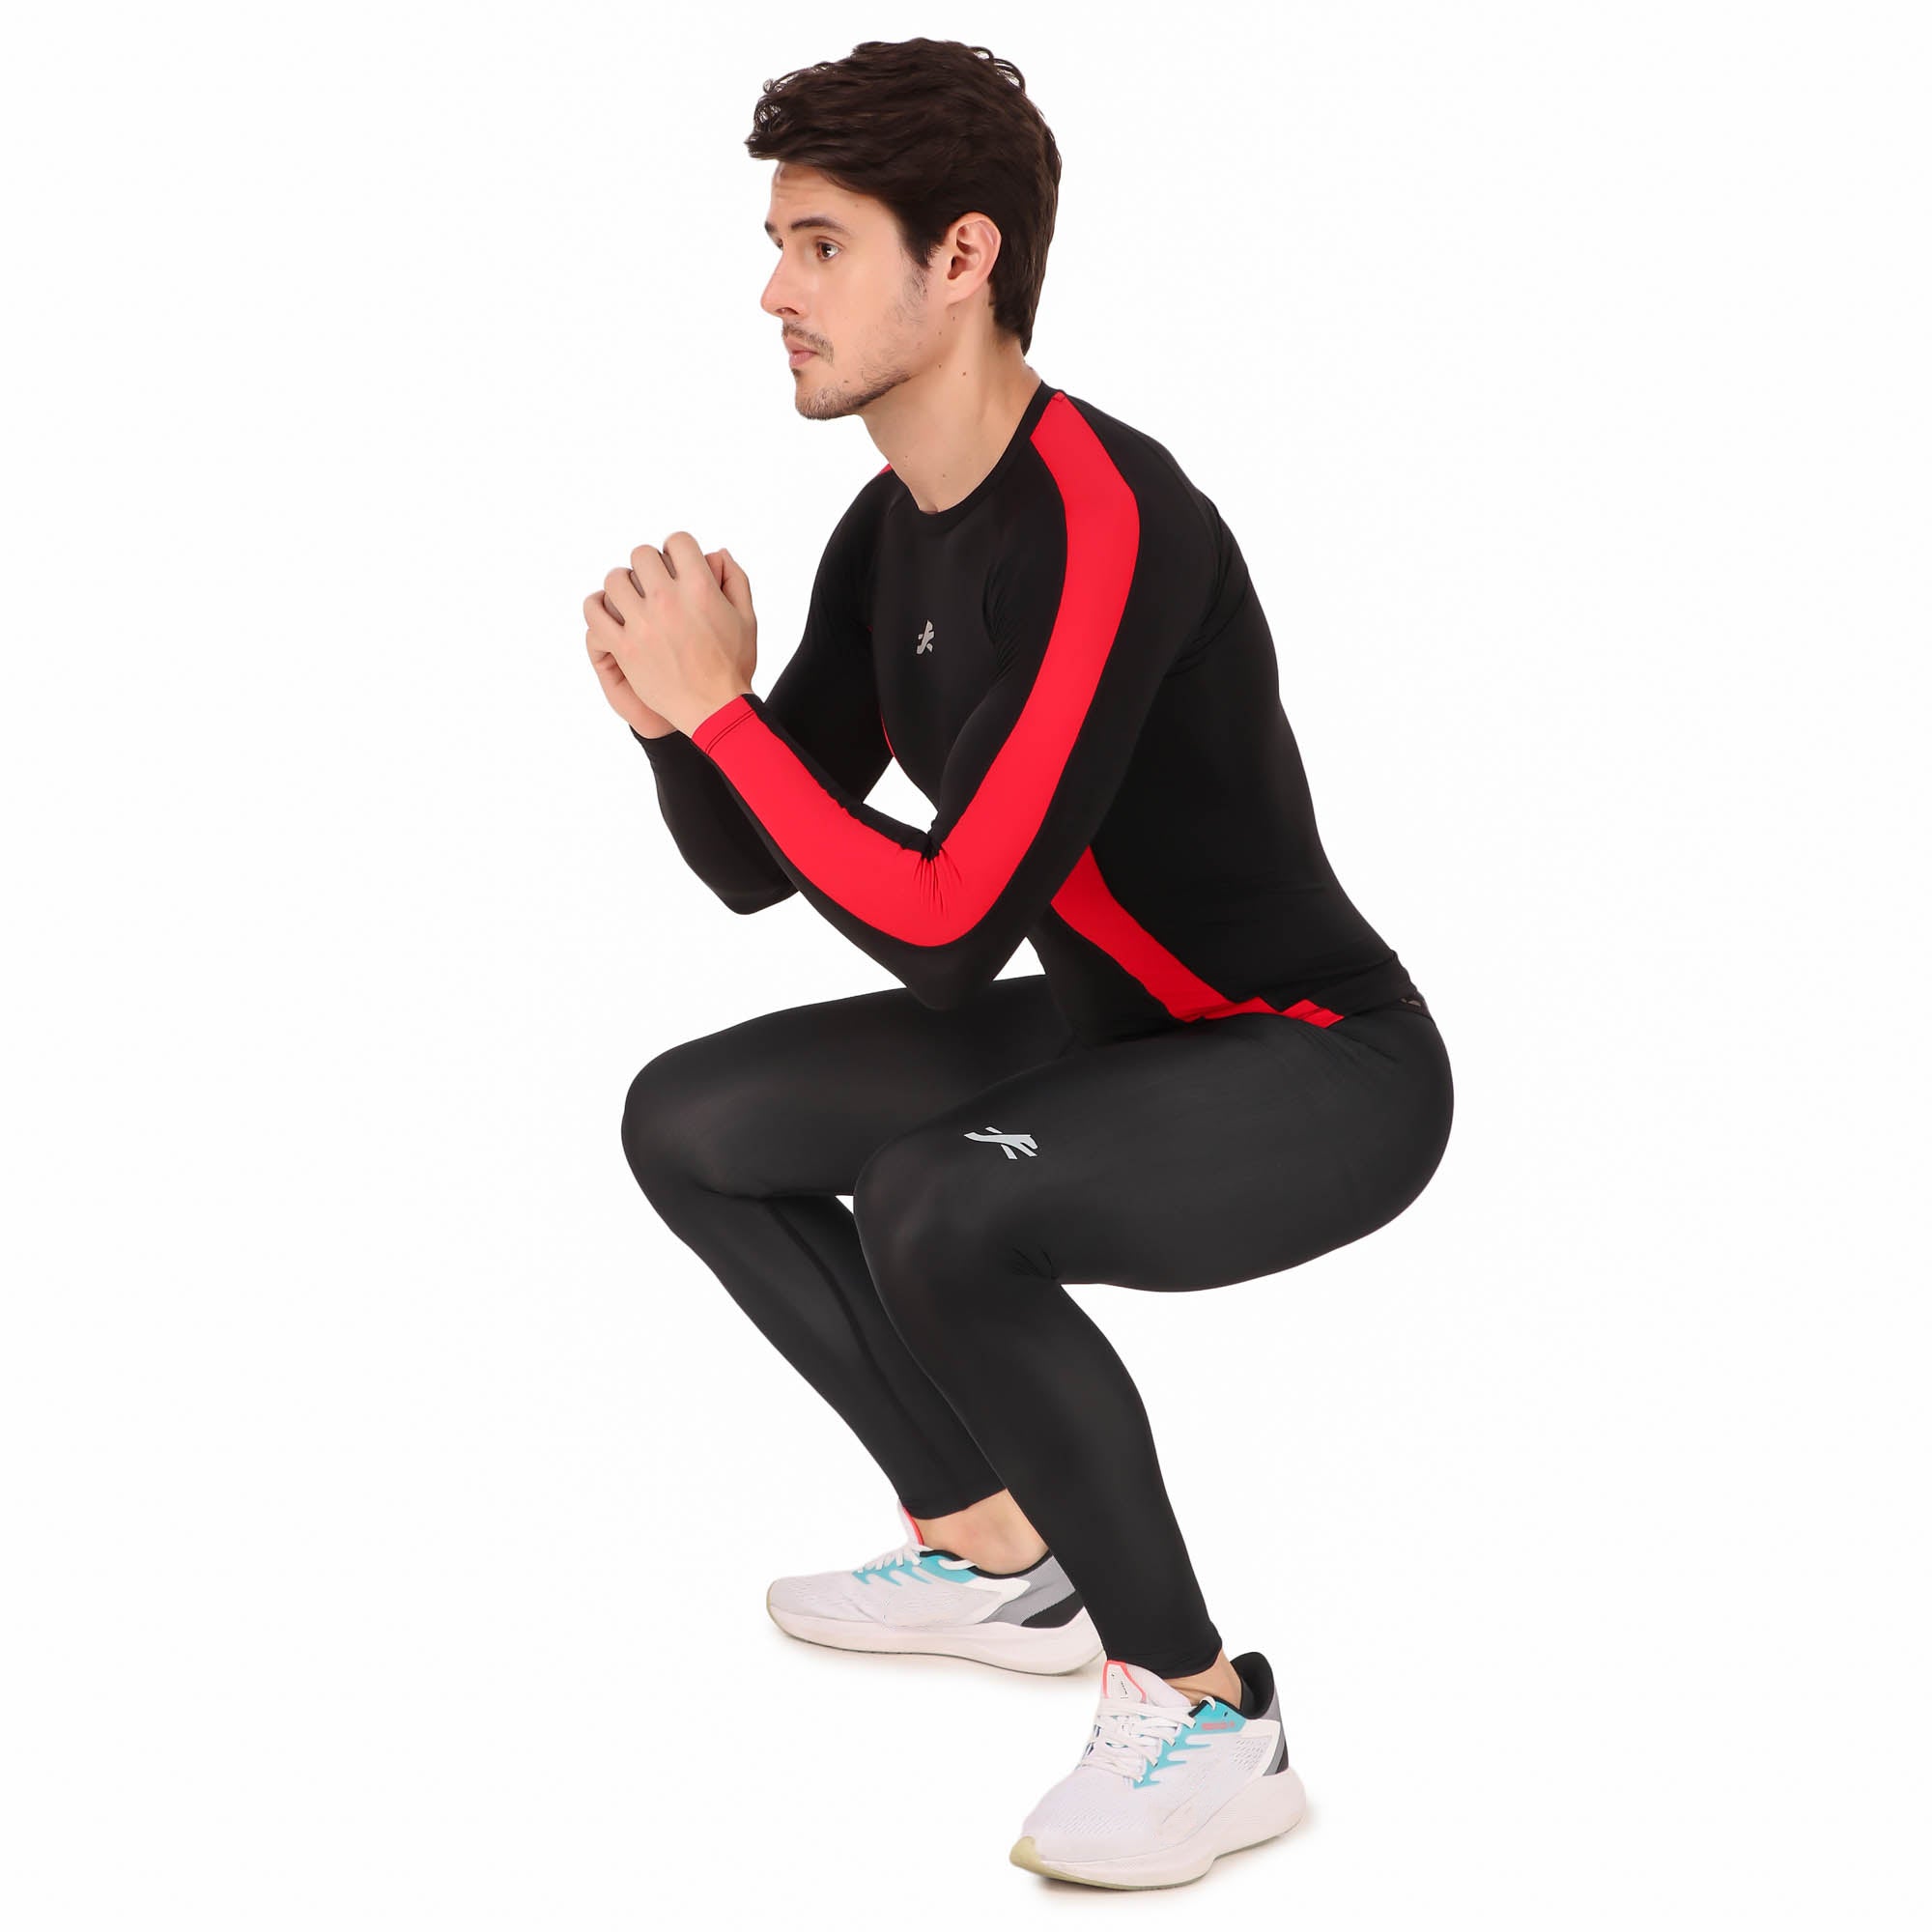 ReDesign Nylon Compression Top Full Sleeve (BLACK/RED)